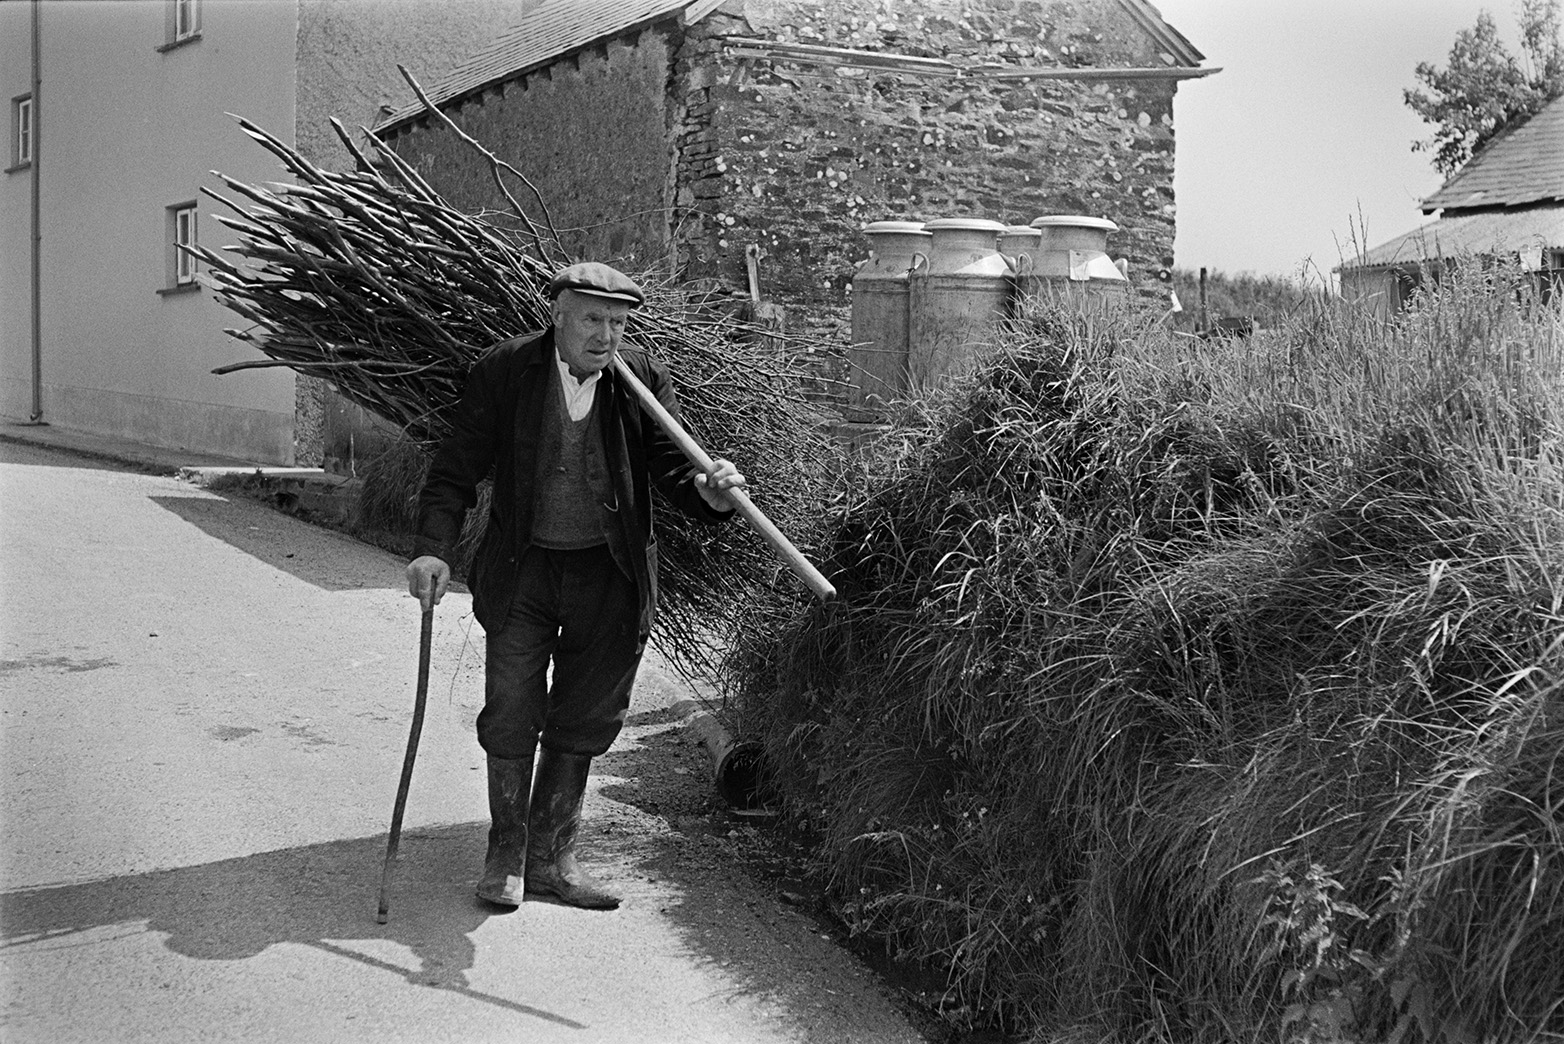 Tom Hooper carrying a bundle of pea sticks on his back and walking down a lane to a field in Beaford. He is using a walking stick. Farm buildings and four milk churns on a stand can be seen in the background.